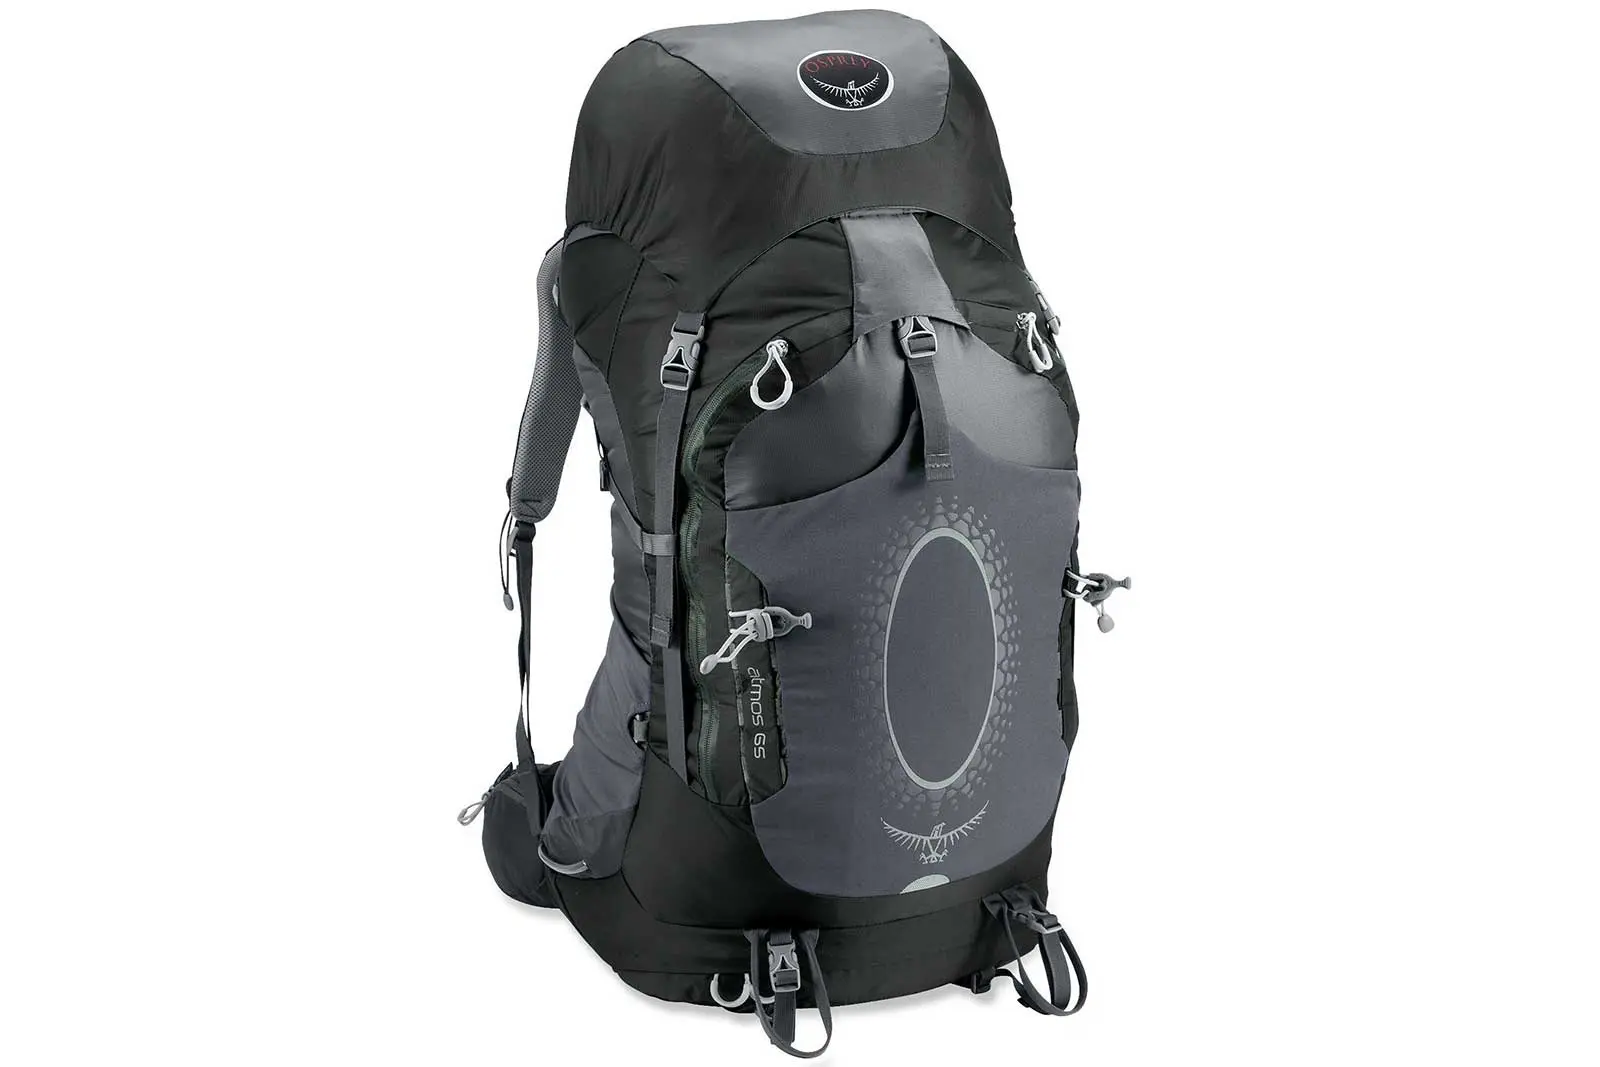 Osprey Atmos 65 Backpack Review